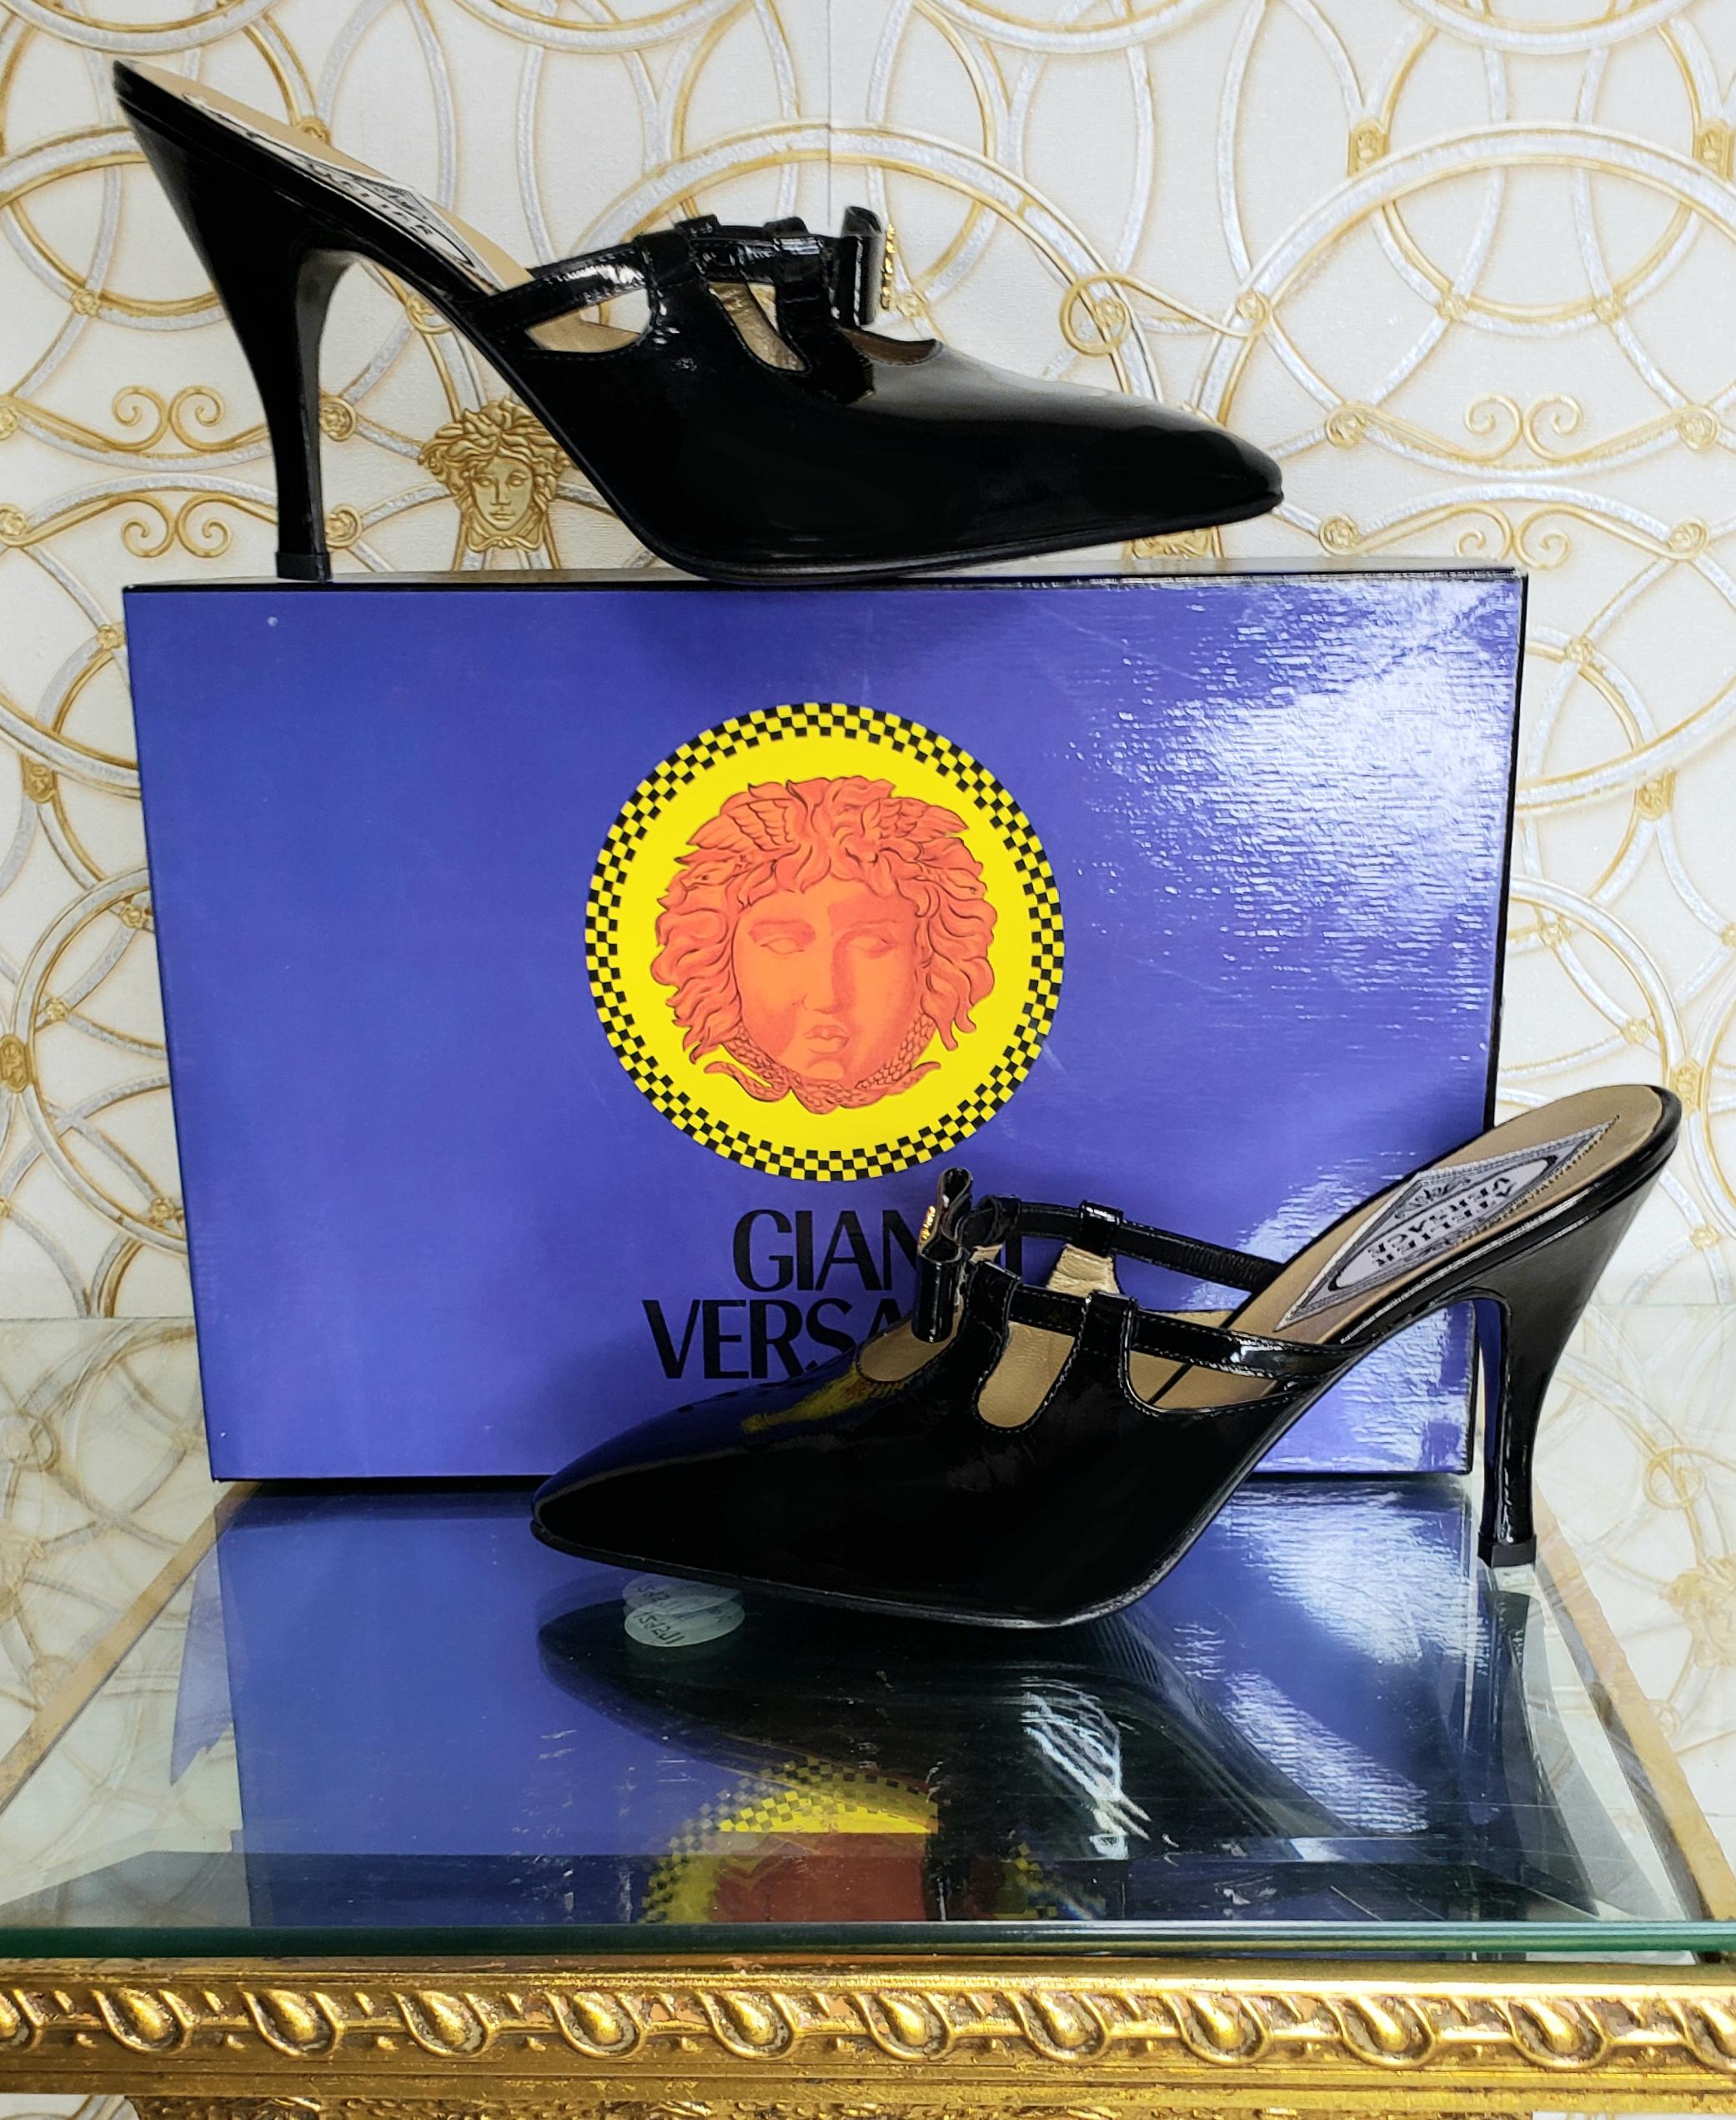 Black VERSACE BLACK PATENT LEATHER PUMP SHOES from ATELIER COLLECTION Sz 38 - 8